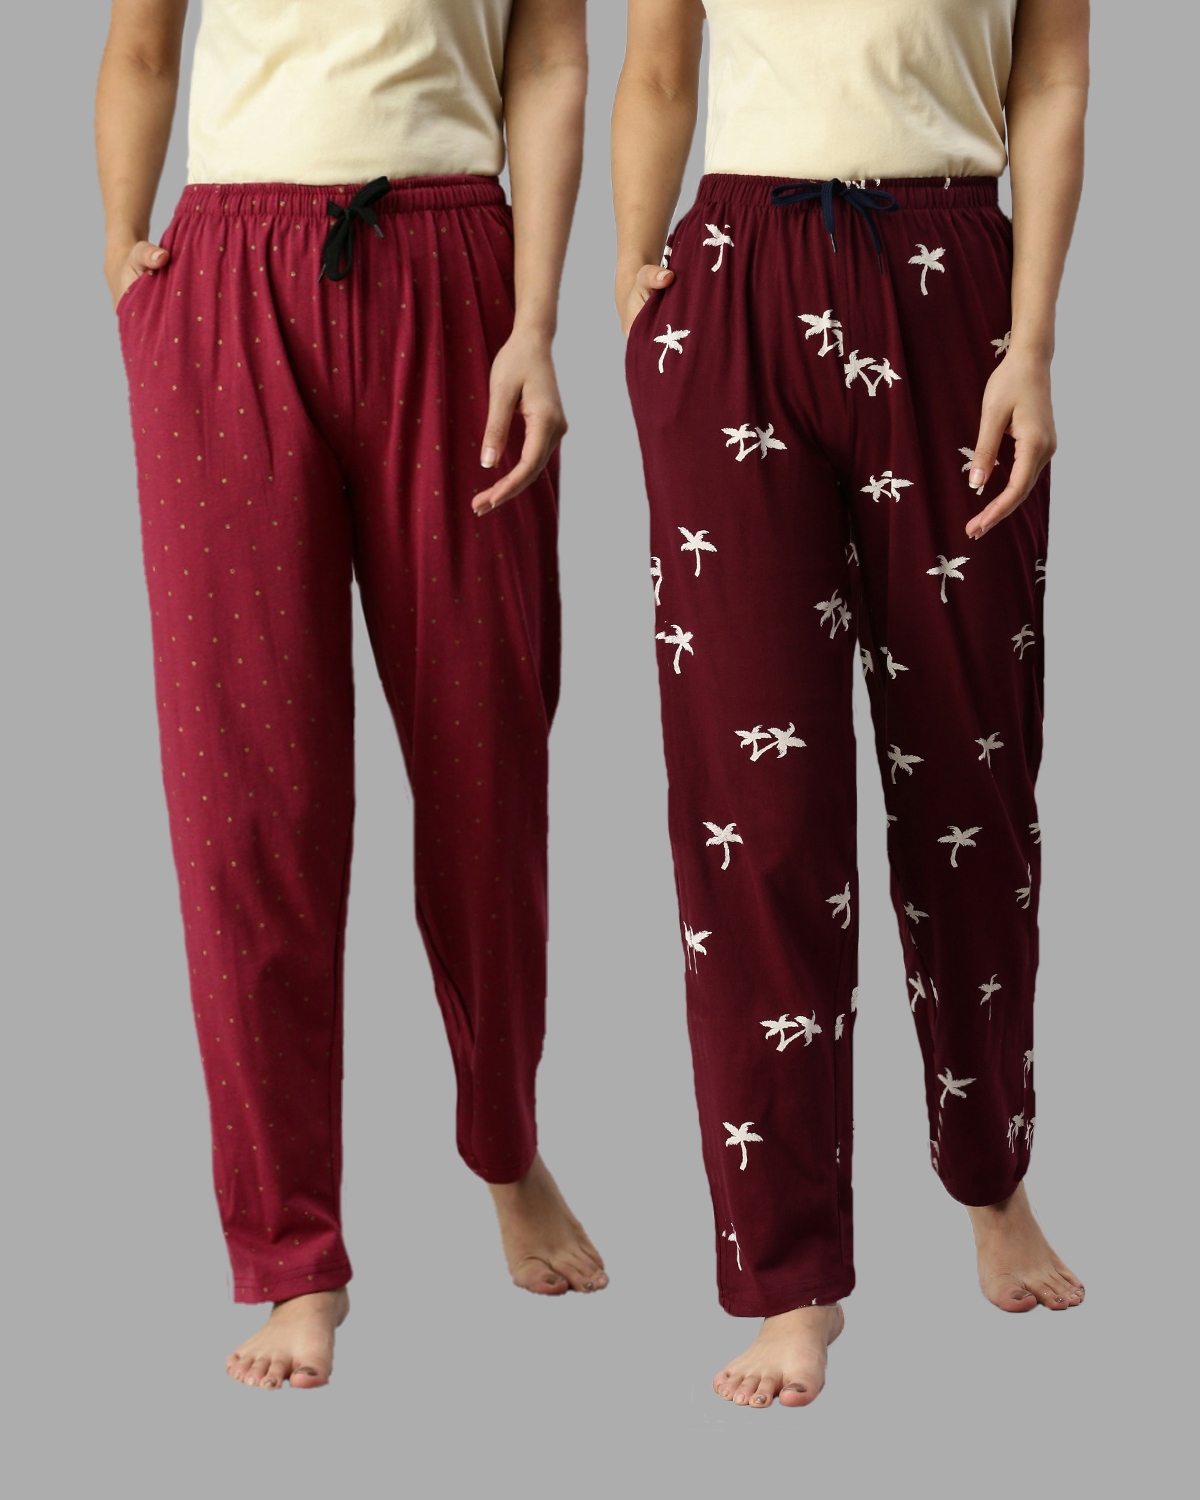 Kryptic Womens 100% Cotton Full Length Lounge Pants - Pack of 2